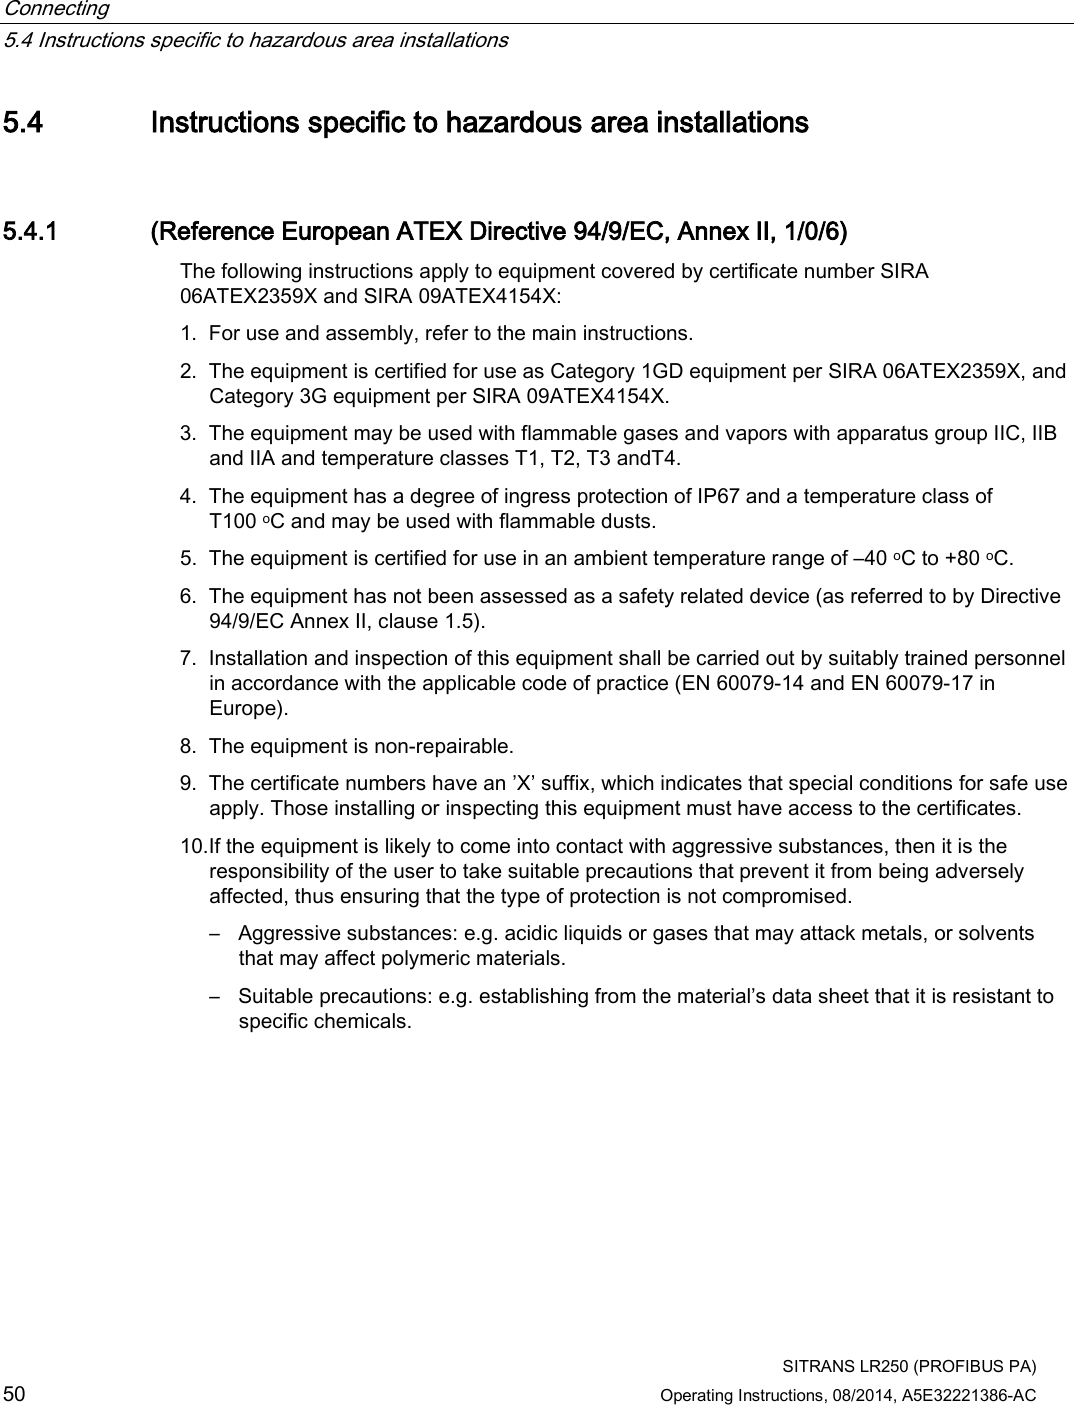 Connecting   5.4 Instructions specific to hazardous area installations  SITRANS LR250 (PROFIBUS PA) 50 Operating Instructions, 08/2014, A5E32221386-AC 5.4 Instructions specific to hazardous area installations 5.4.1 (Reference European ATEX Directive 94/9/EC, Annex II, 1/0/6) The following instructions apply to equipment covered by certificate number SIRA 06ATEX2359X and SIRA 09ATEX4154X: 1. For use and assembly, refer to the main instructions. 2. The equipment is certified for use as Category 1GD equipment per SIRA 06ATEX2359X, and Category 3G equipment per SIRA 09ATEX4154X. 3. The equipment may be used with flammable gases and vapors with apparatus group IIC, IIB and IIA and temperature classes T1, T2, T3 andT4. 4. The equipment has a degree of ingress protection of IP67 and a temperature class of T100 oC and may be used with flammable dusts. 5. The equipment is certified for use in an ambient temperature range of –40 oC to +80 oC. 6. The equipment has not been assessed as a safety related device (as referred to by Directive 94/9/EC Annex II, clause 1.5). 7. Installation and inspection of this equipment shall be carried out by suitably trained personnel in accordance with the applicable code of practice (EN 60079-14 and EN 60079-17 in Europe). 8. The equipment is non-repairable. 9. The certificate numbers have an ’X’ suffix, which indicates that special conditions for safe use apply. Those installing or inspecting this equipment must have access to the certificates. 10.If the equipment is likely to come into contact with aggressive substances, then it is the responsibility of the user to take suitable precautions that prevent it from being adversely affected, thus ensuring that the type of protection is not compromised. – Aggressive substances: e.g. acidic liquids or gases that may attack metals, or solvents that may affect polymeric materials. – Suitable precautions: e.g. establishing from the material’s data sheet that it is resistant to specific chemicals. 